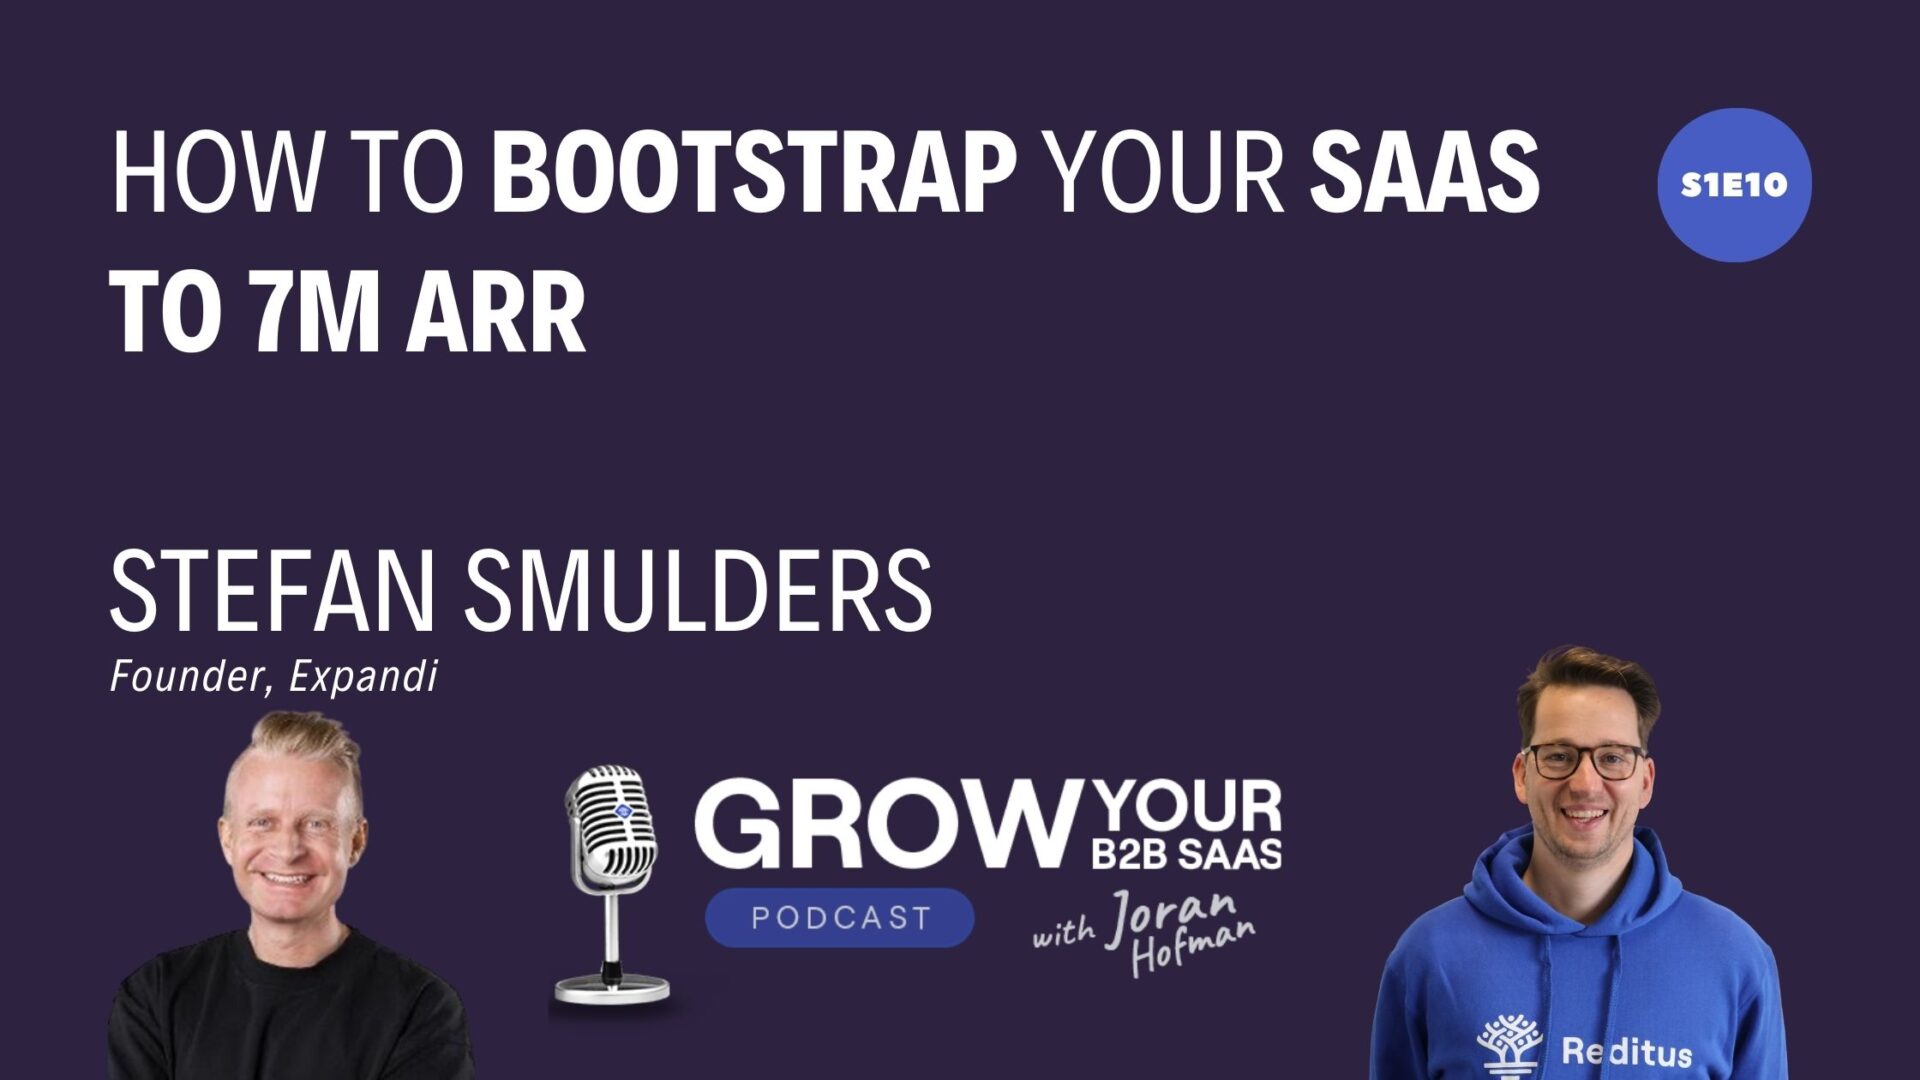 https://www.getreditus.com/podcast/s1e10-how-to-bootstrap-your-saas-to-7m-arr-with-stefan-smulders/